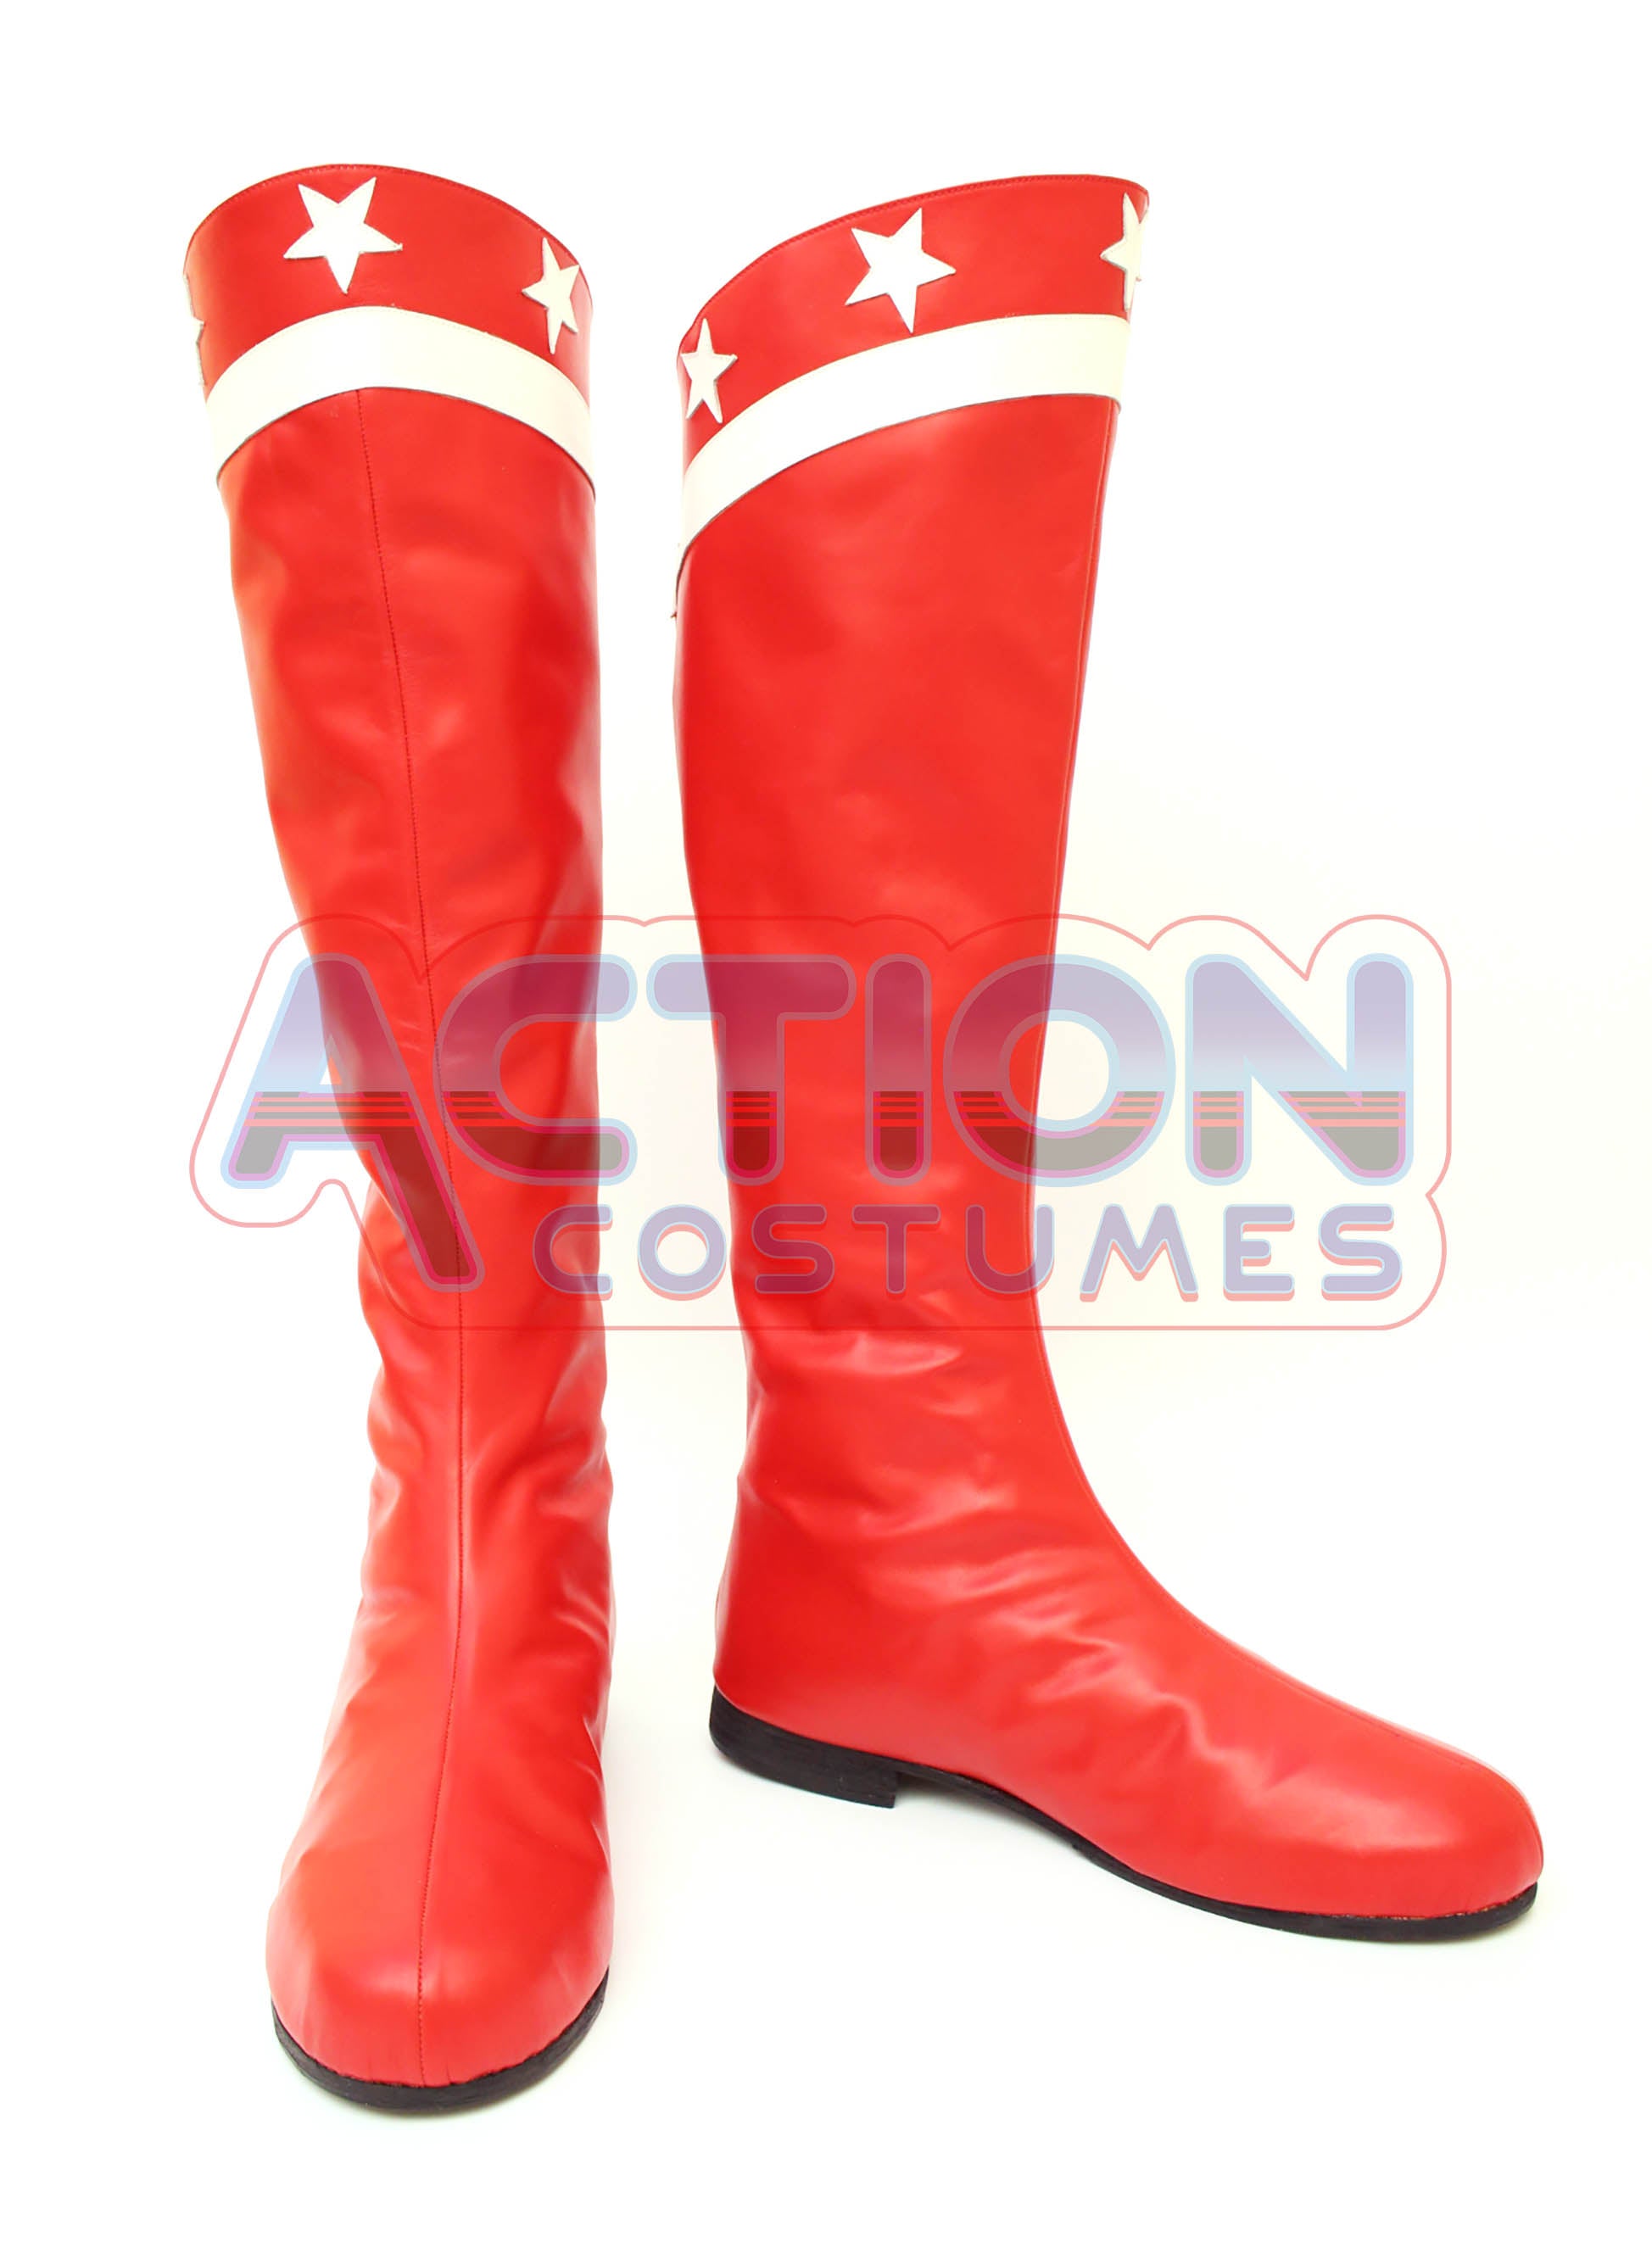 captain-america-deluxe-boots-70-s-style